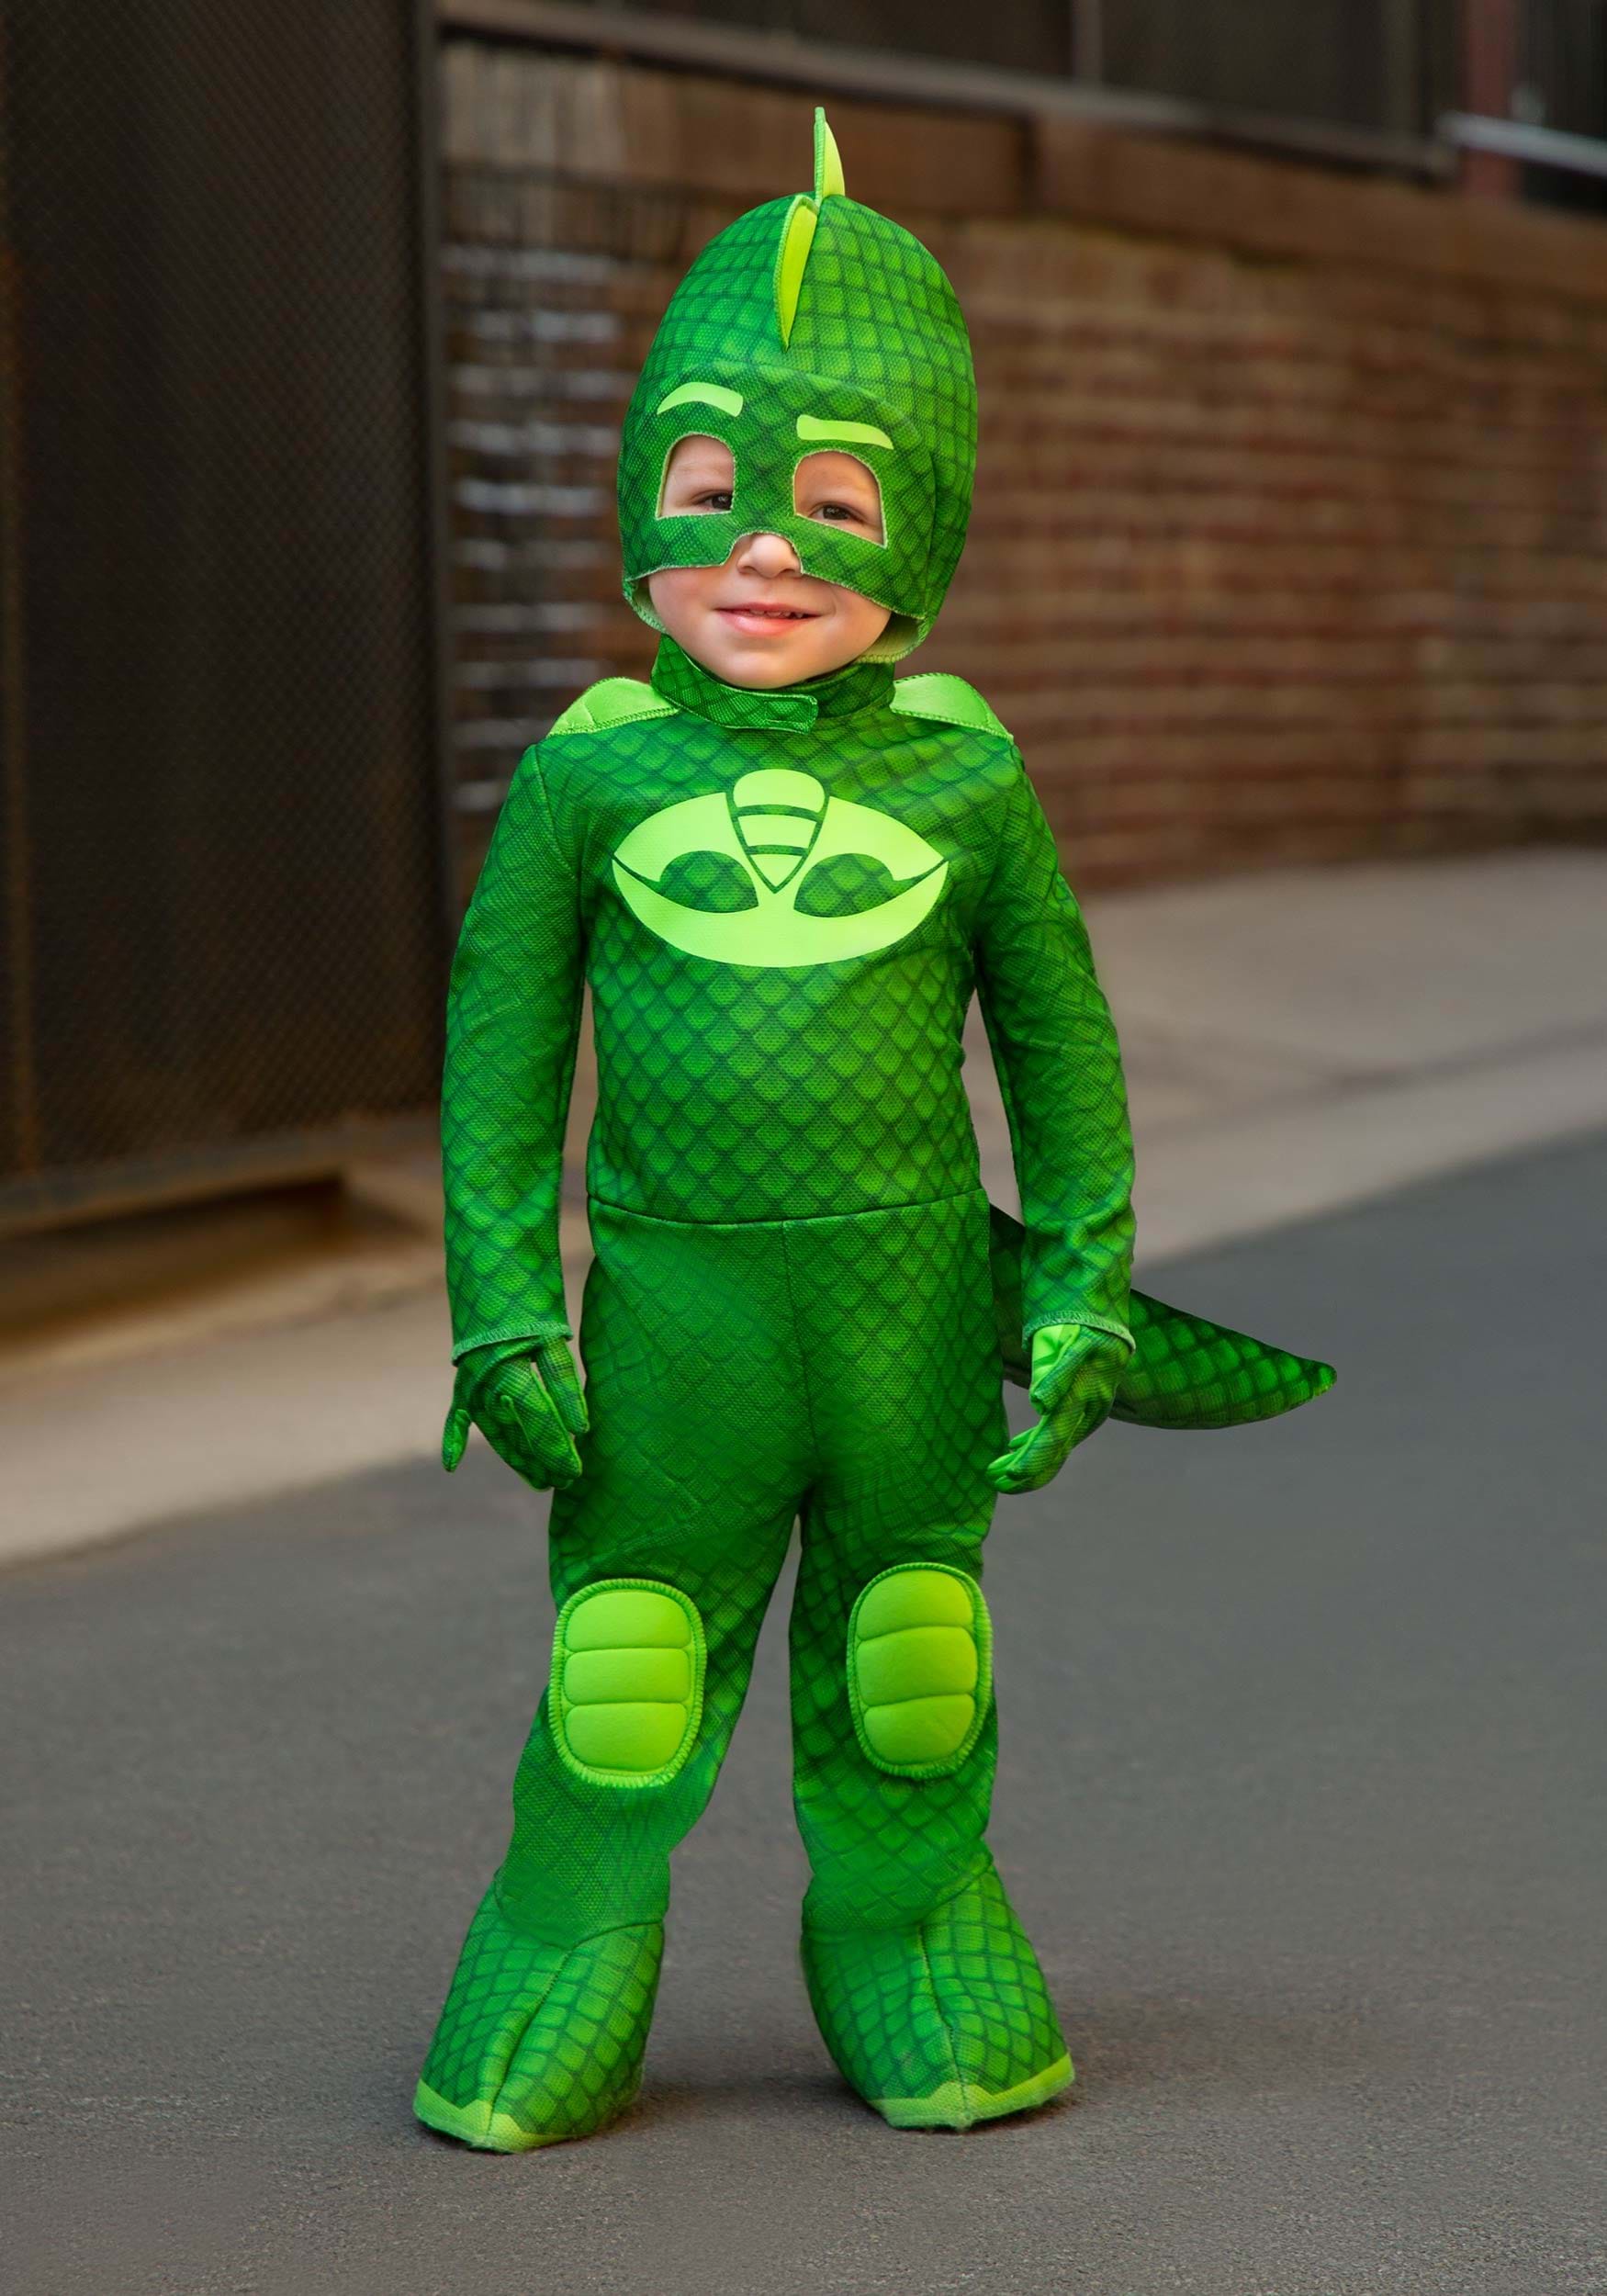 https://images.halloweencostumes.ca/products/39804/1-1/deluxe-pj-masks-gecko-costume-update.jpg